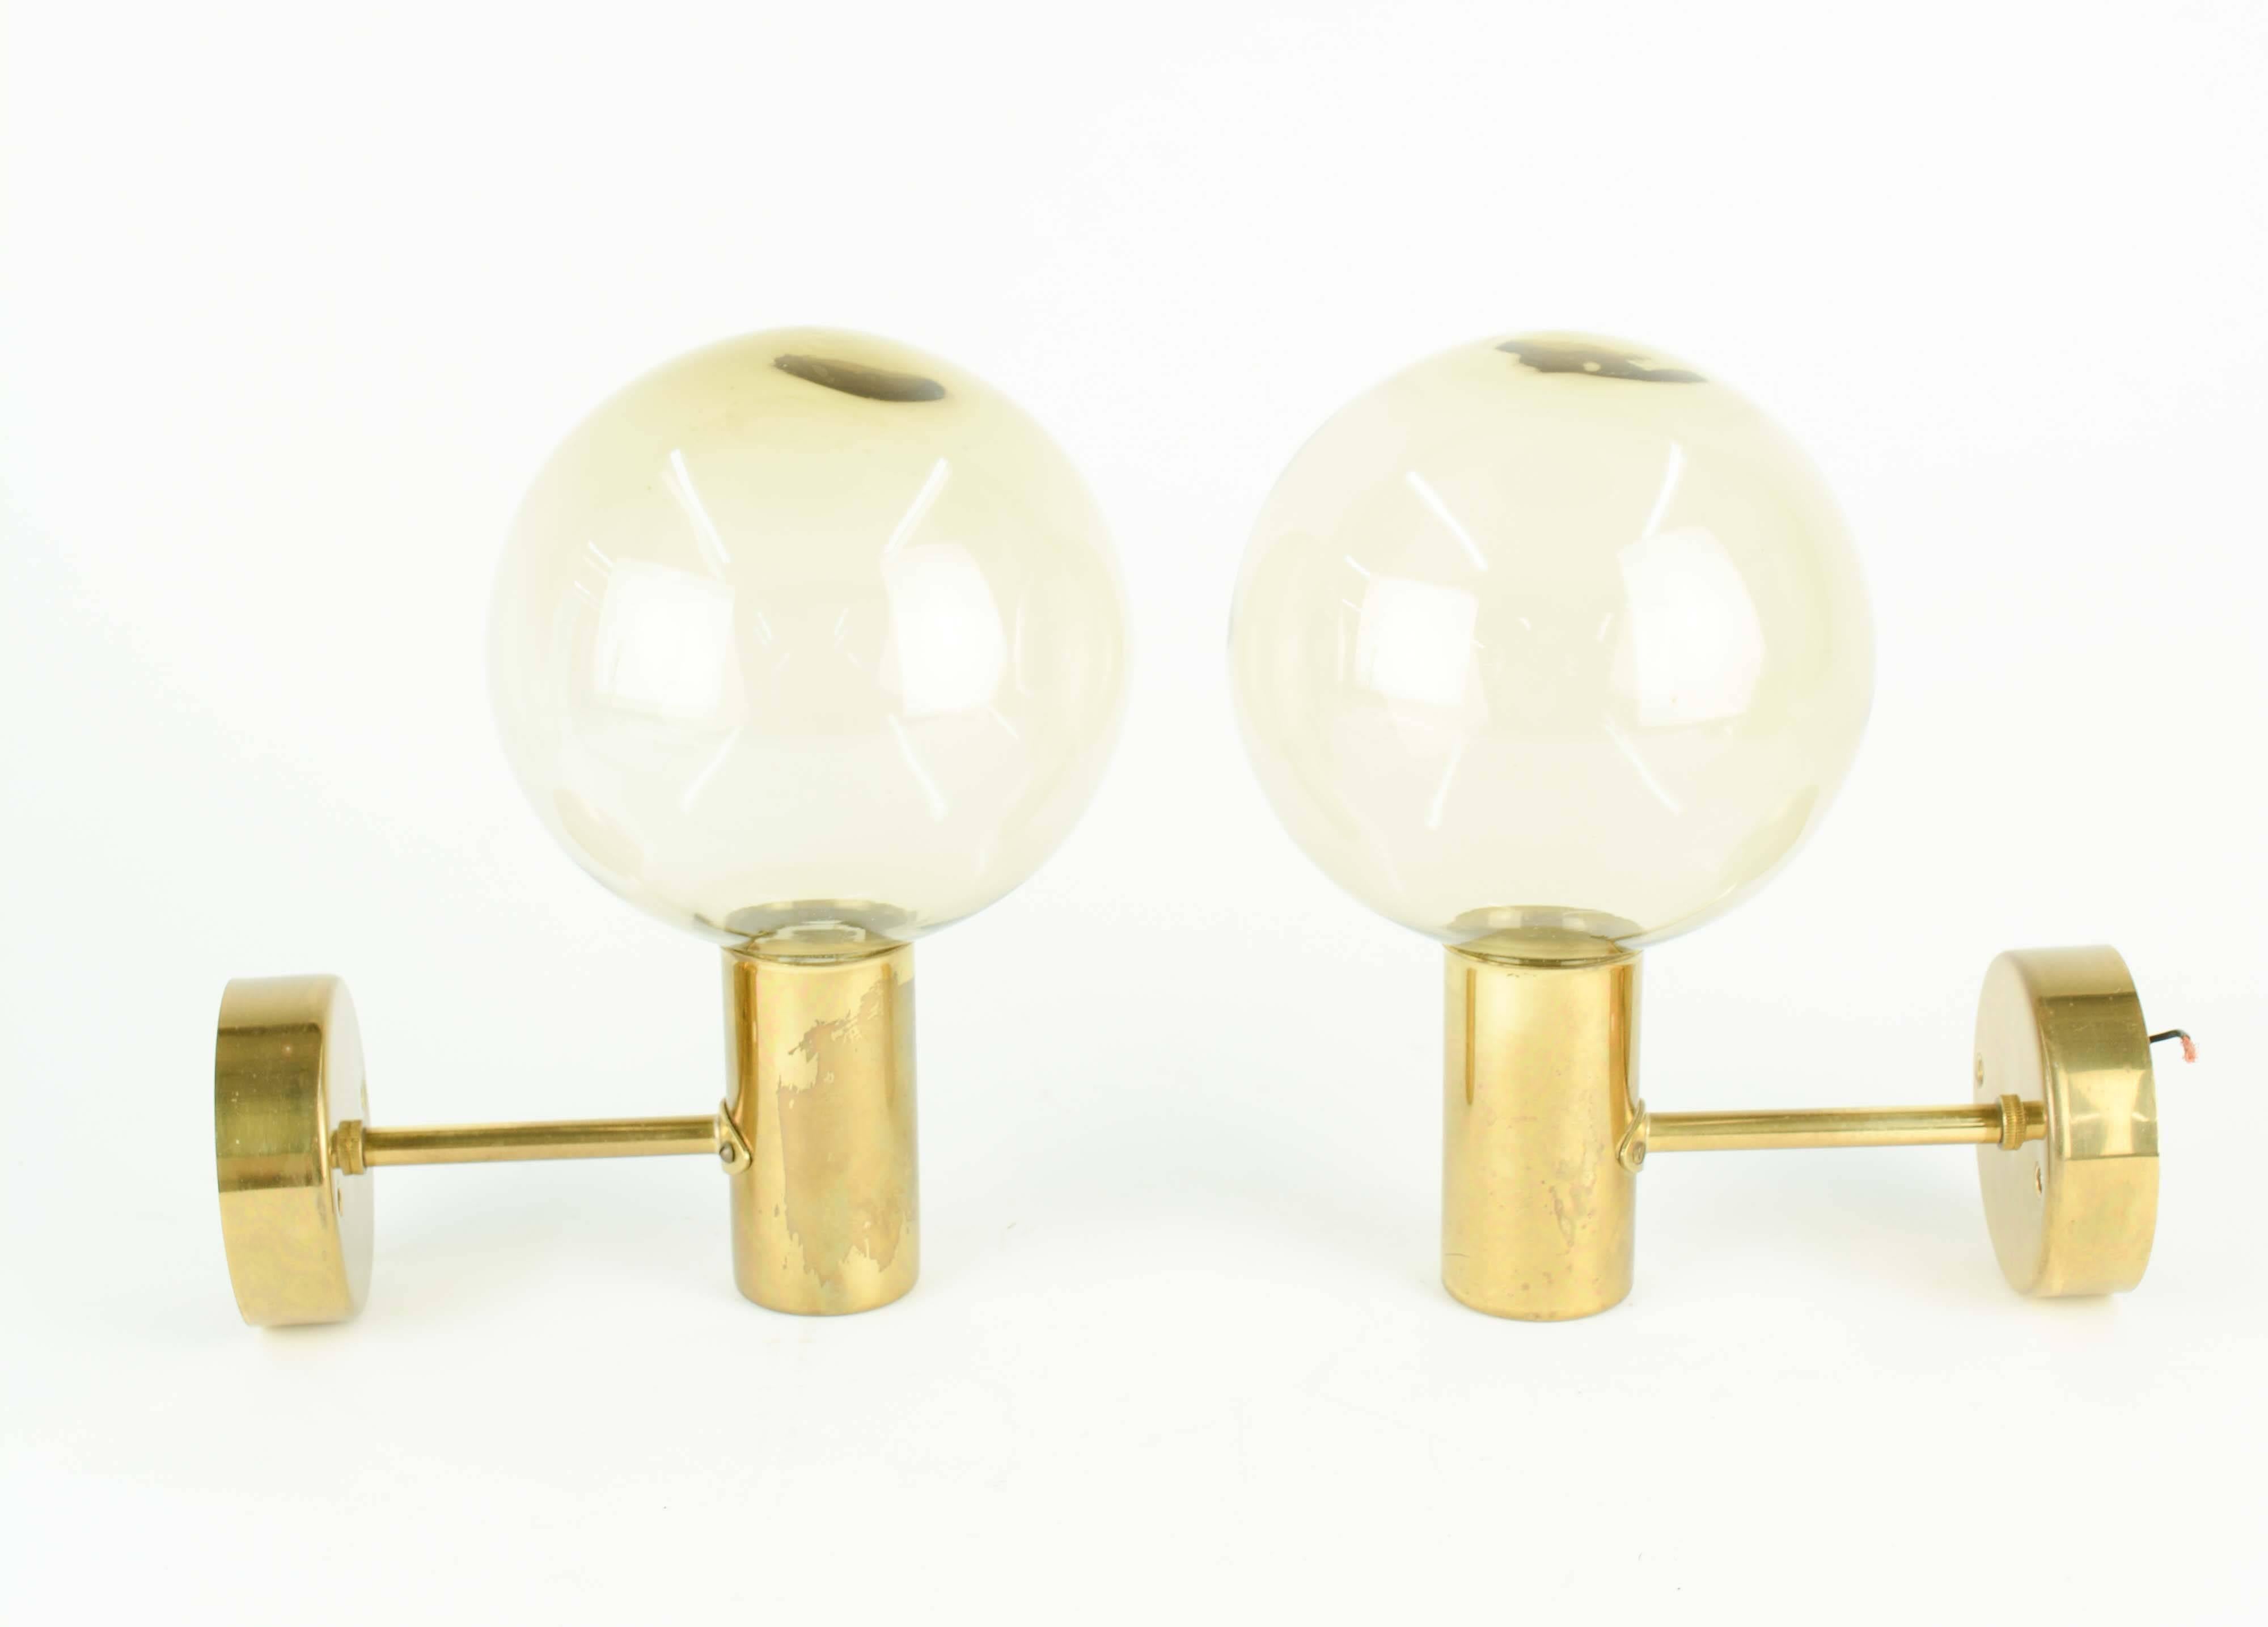 Hans-Agne Jakobsson's Model V-149 wall scones with smoked and handblown glass sconces. Produced in Sweden in the 1960s and feature brass fixtures and smoked glass globes.